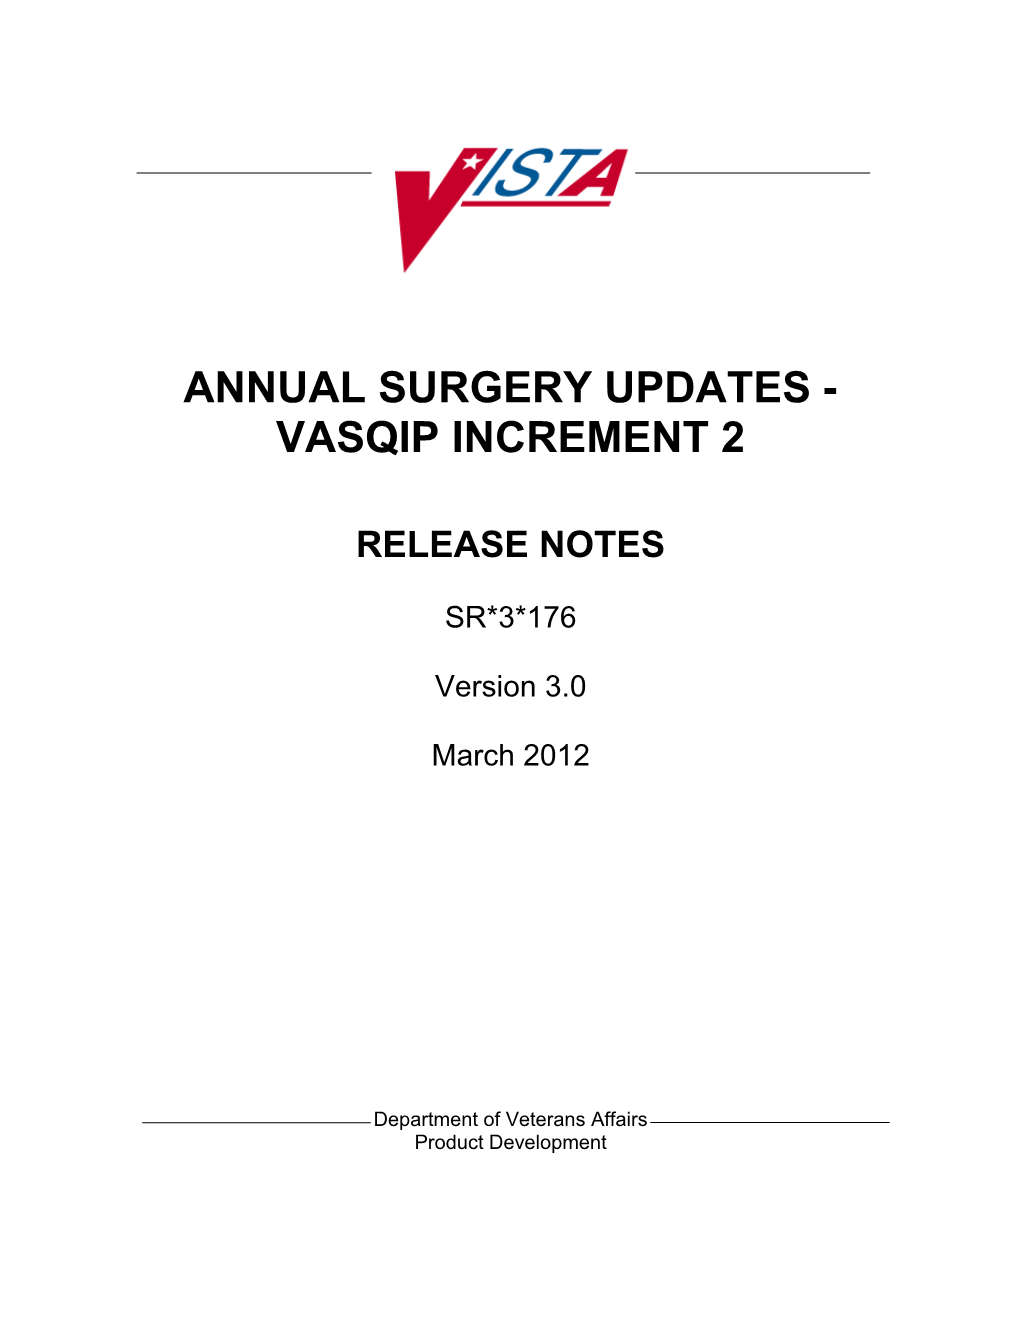 Annual Surgery Updates Increment 2